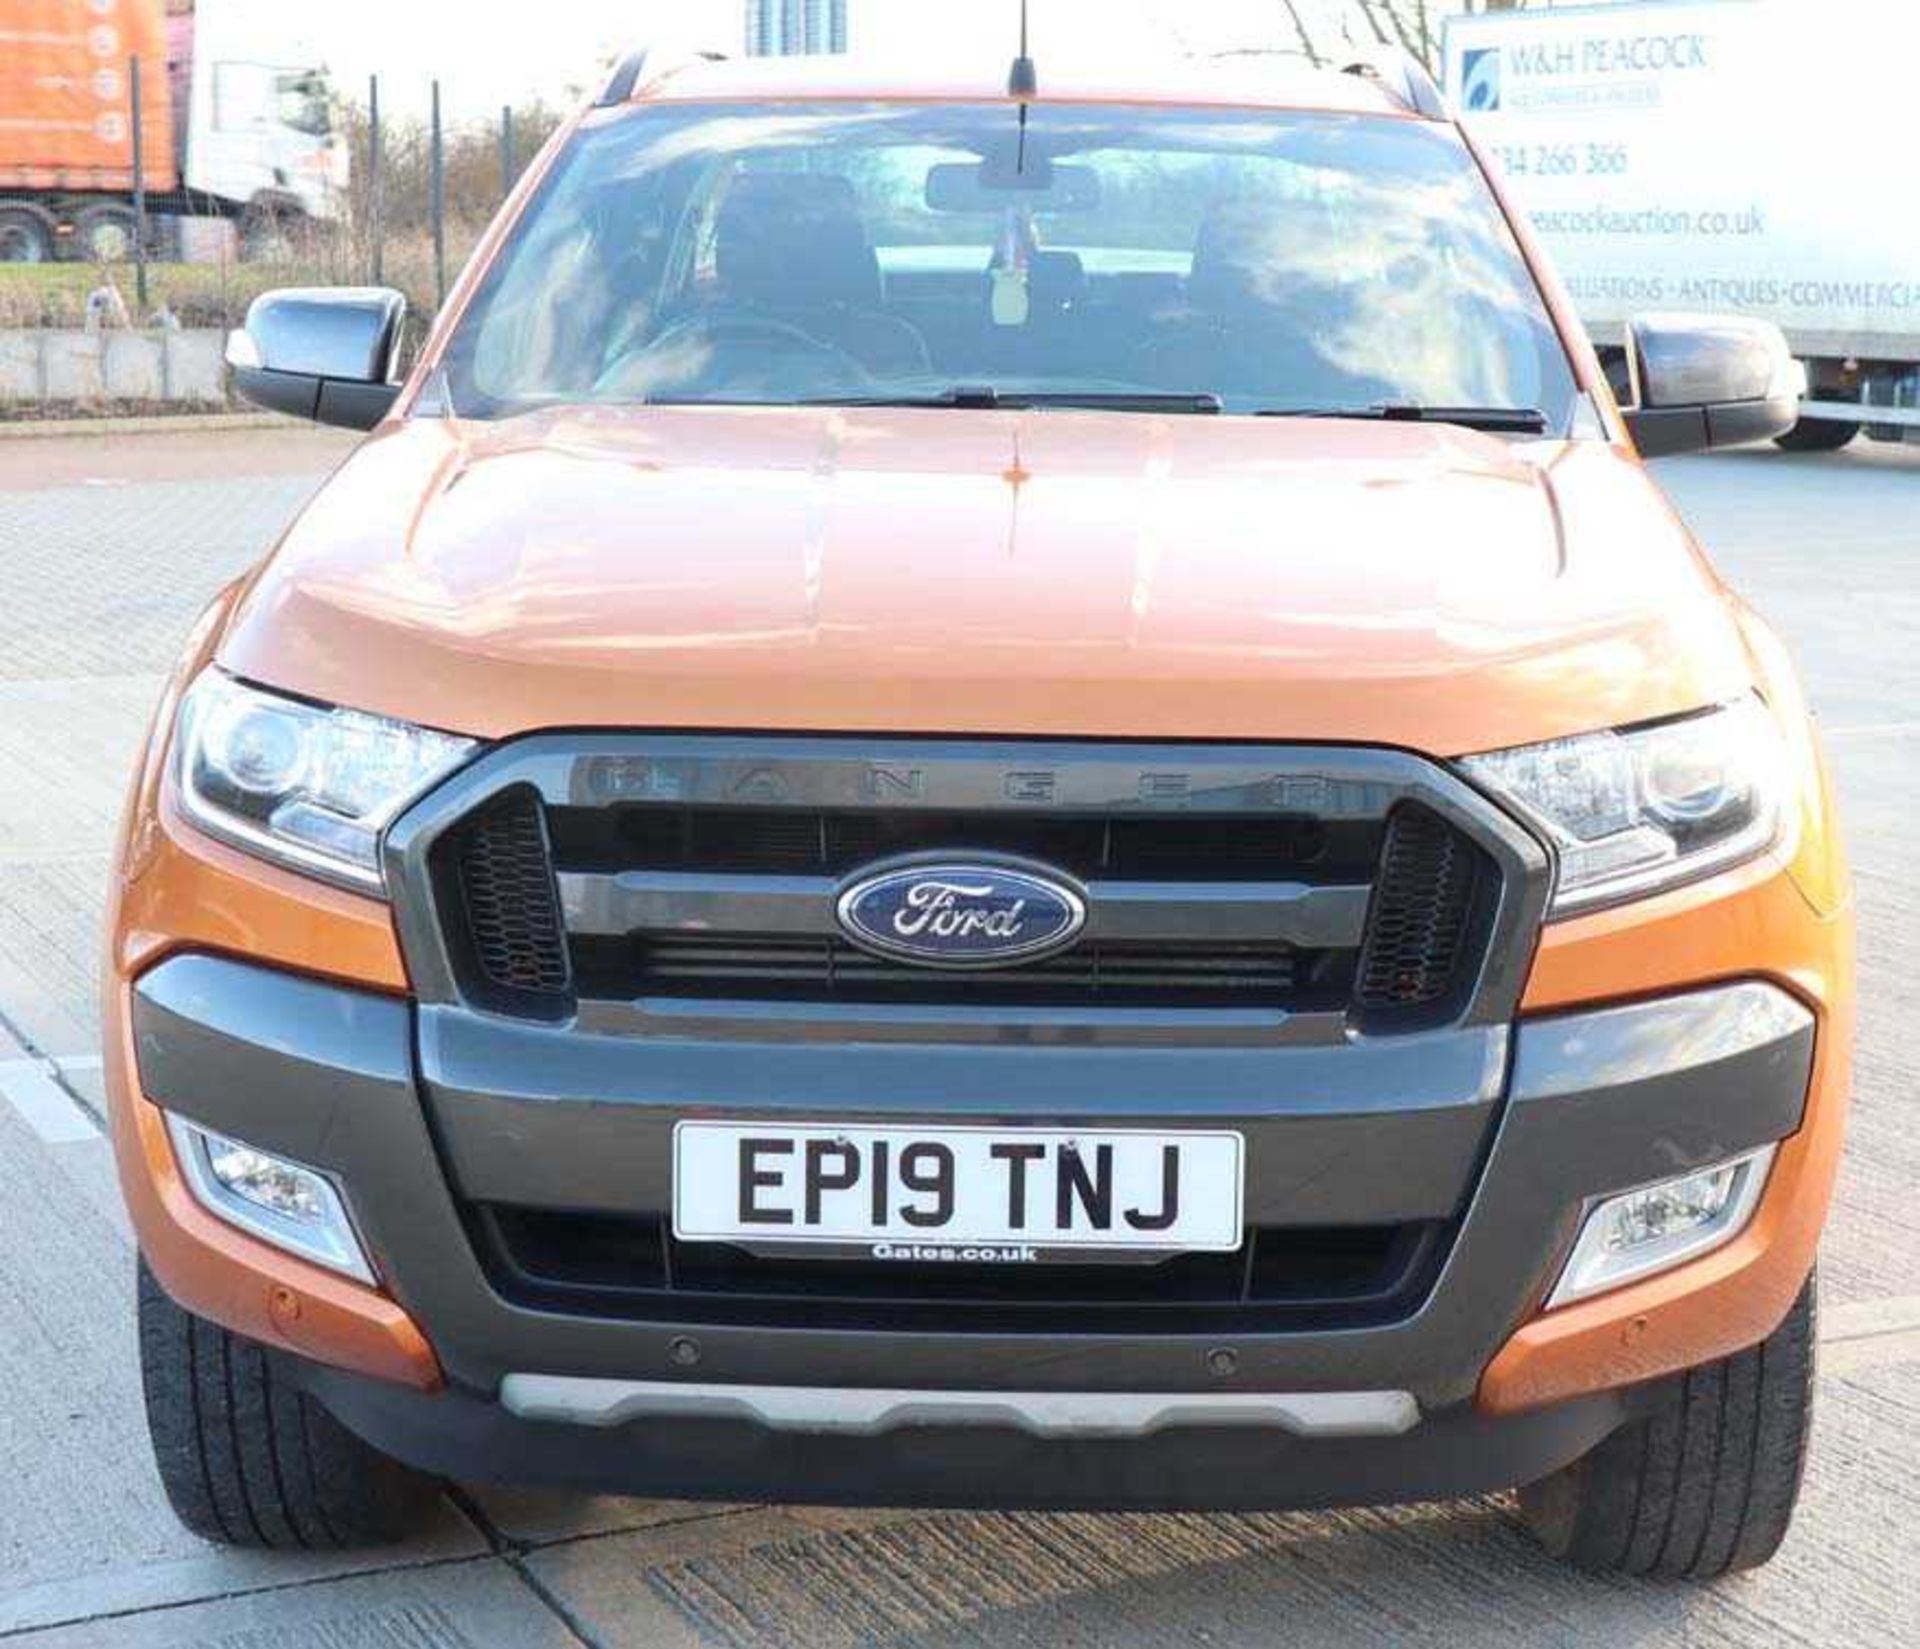 EP19 TNJ (2019) Ford Ranger Wildtrak 4x4 DCB T 3198cc diesel pick up with double cab and 6 speed - Image 5 of 16